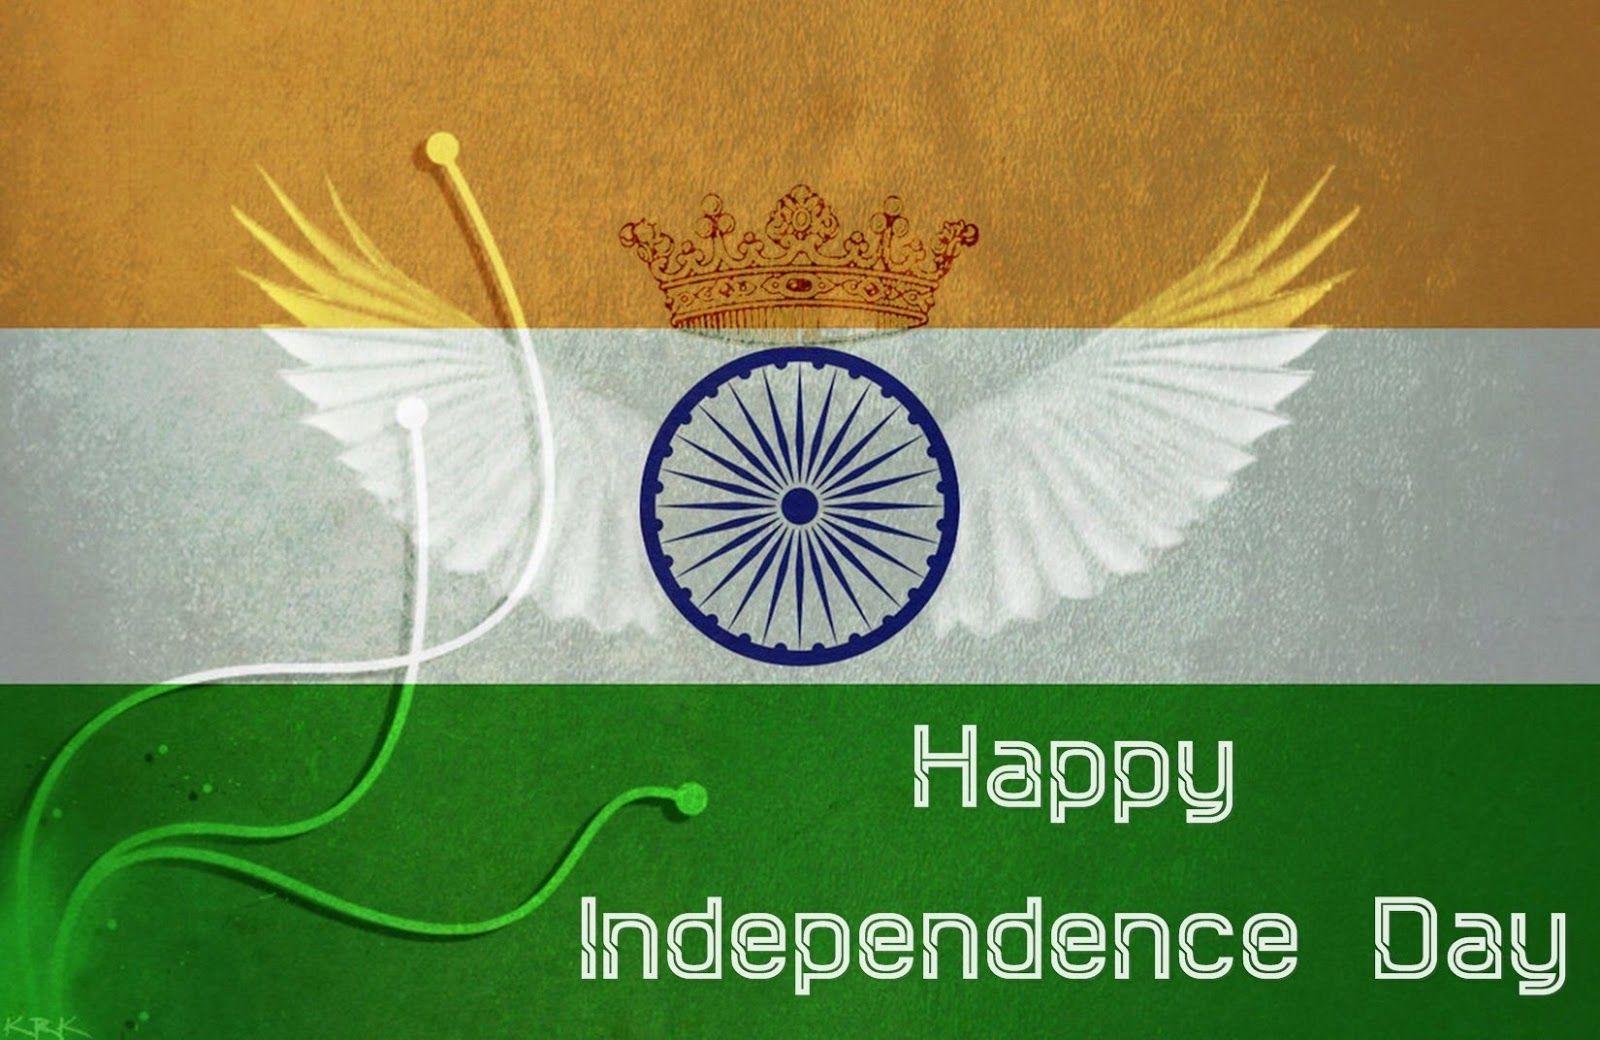 Happy Independence Day India Image and Wallpaper. Happy